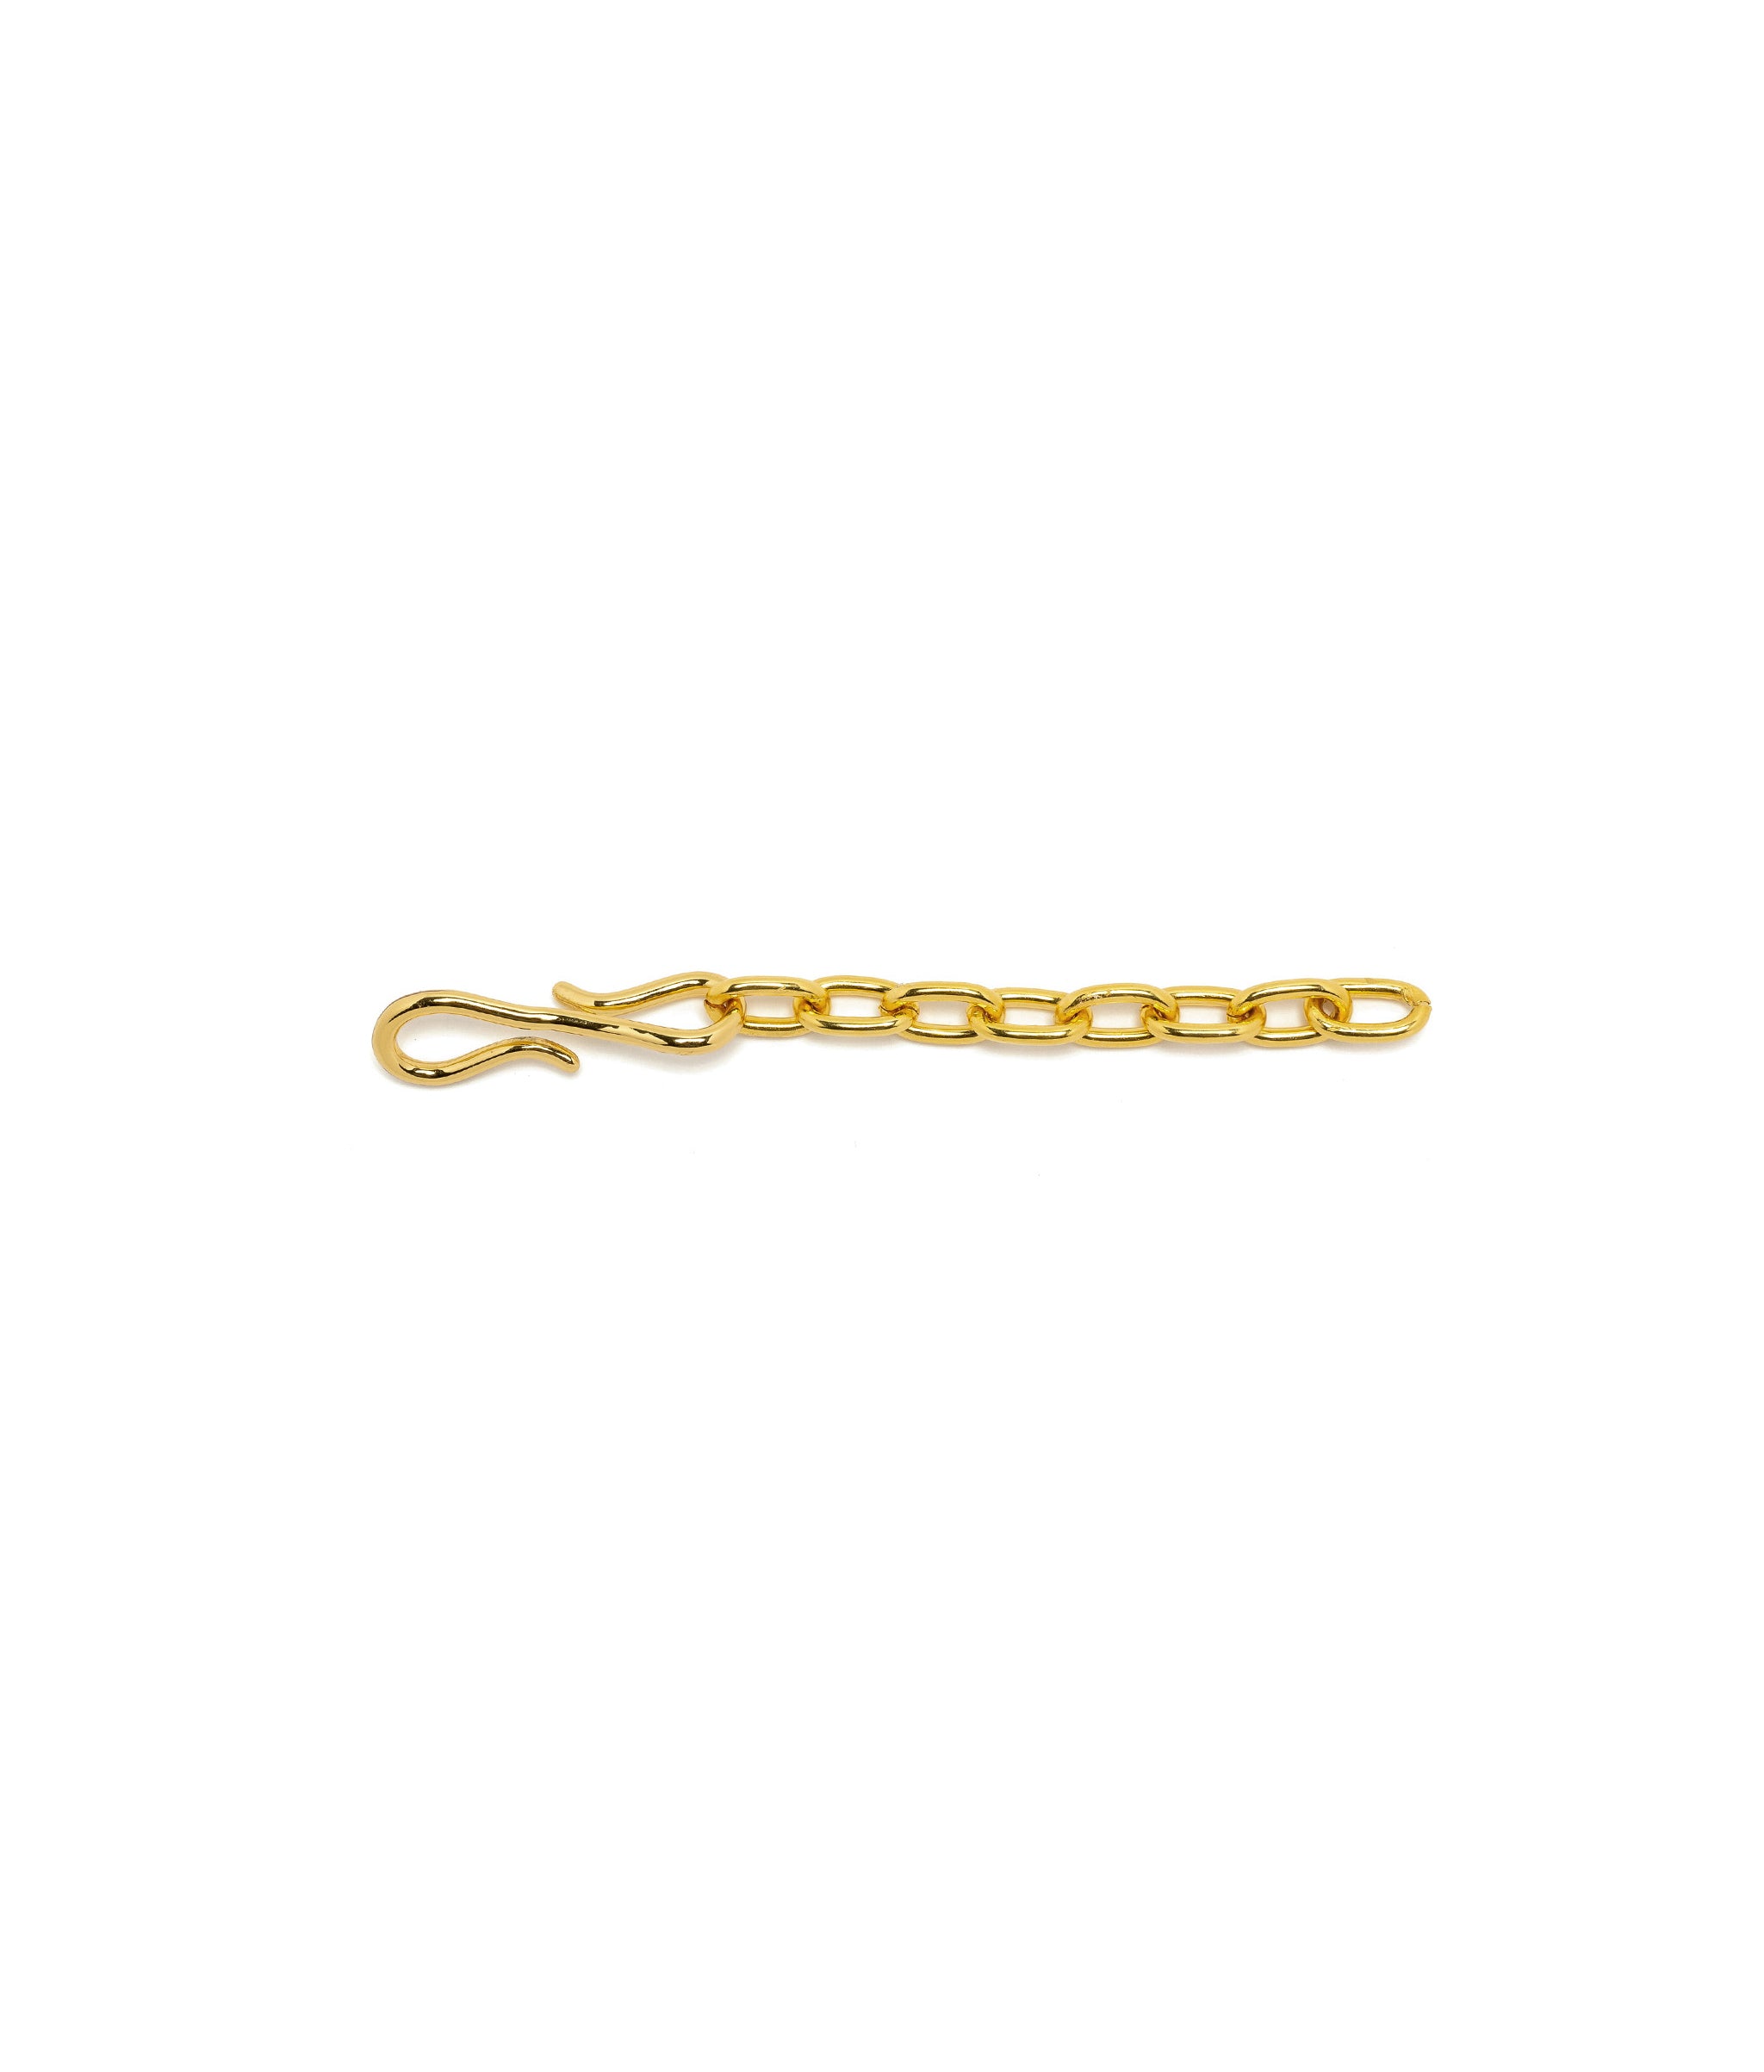 4.25" Gold Extender. Gold-plated brass long link chain with S-hook, to lengthen your Lizzie Fortunato necklaces.